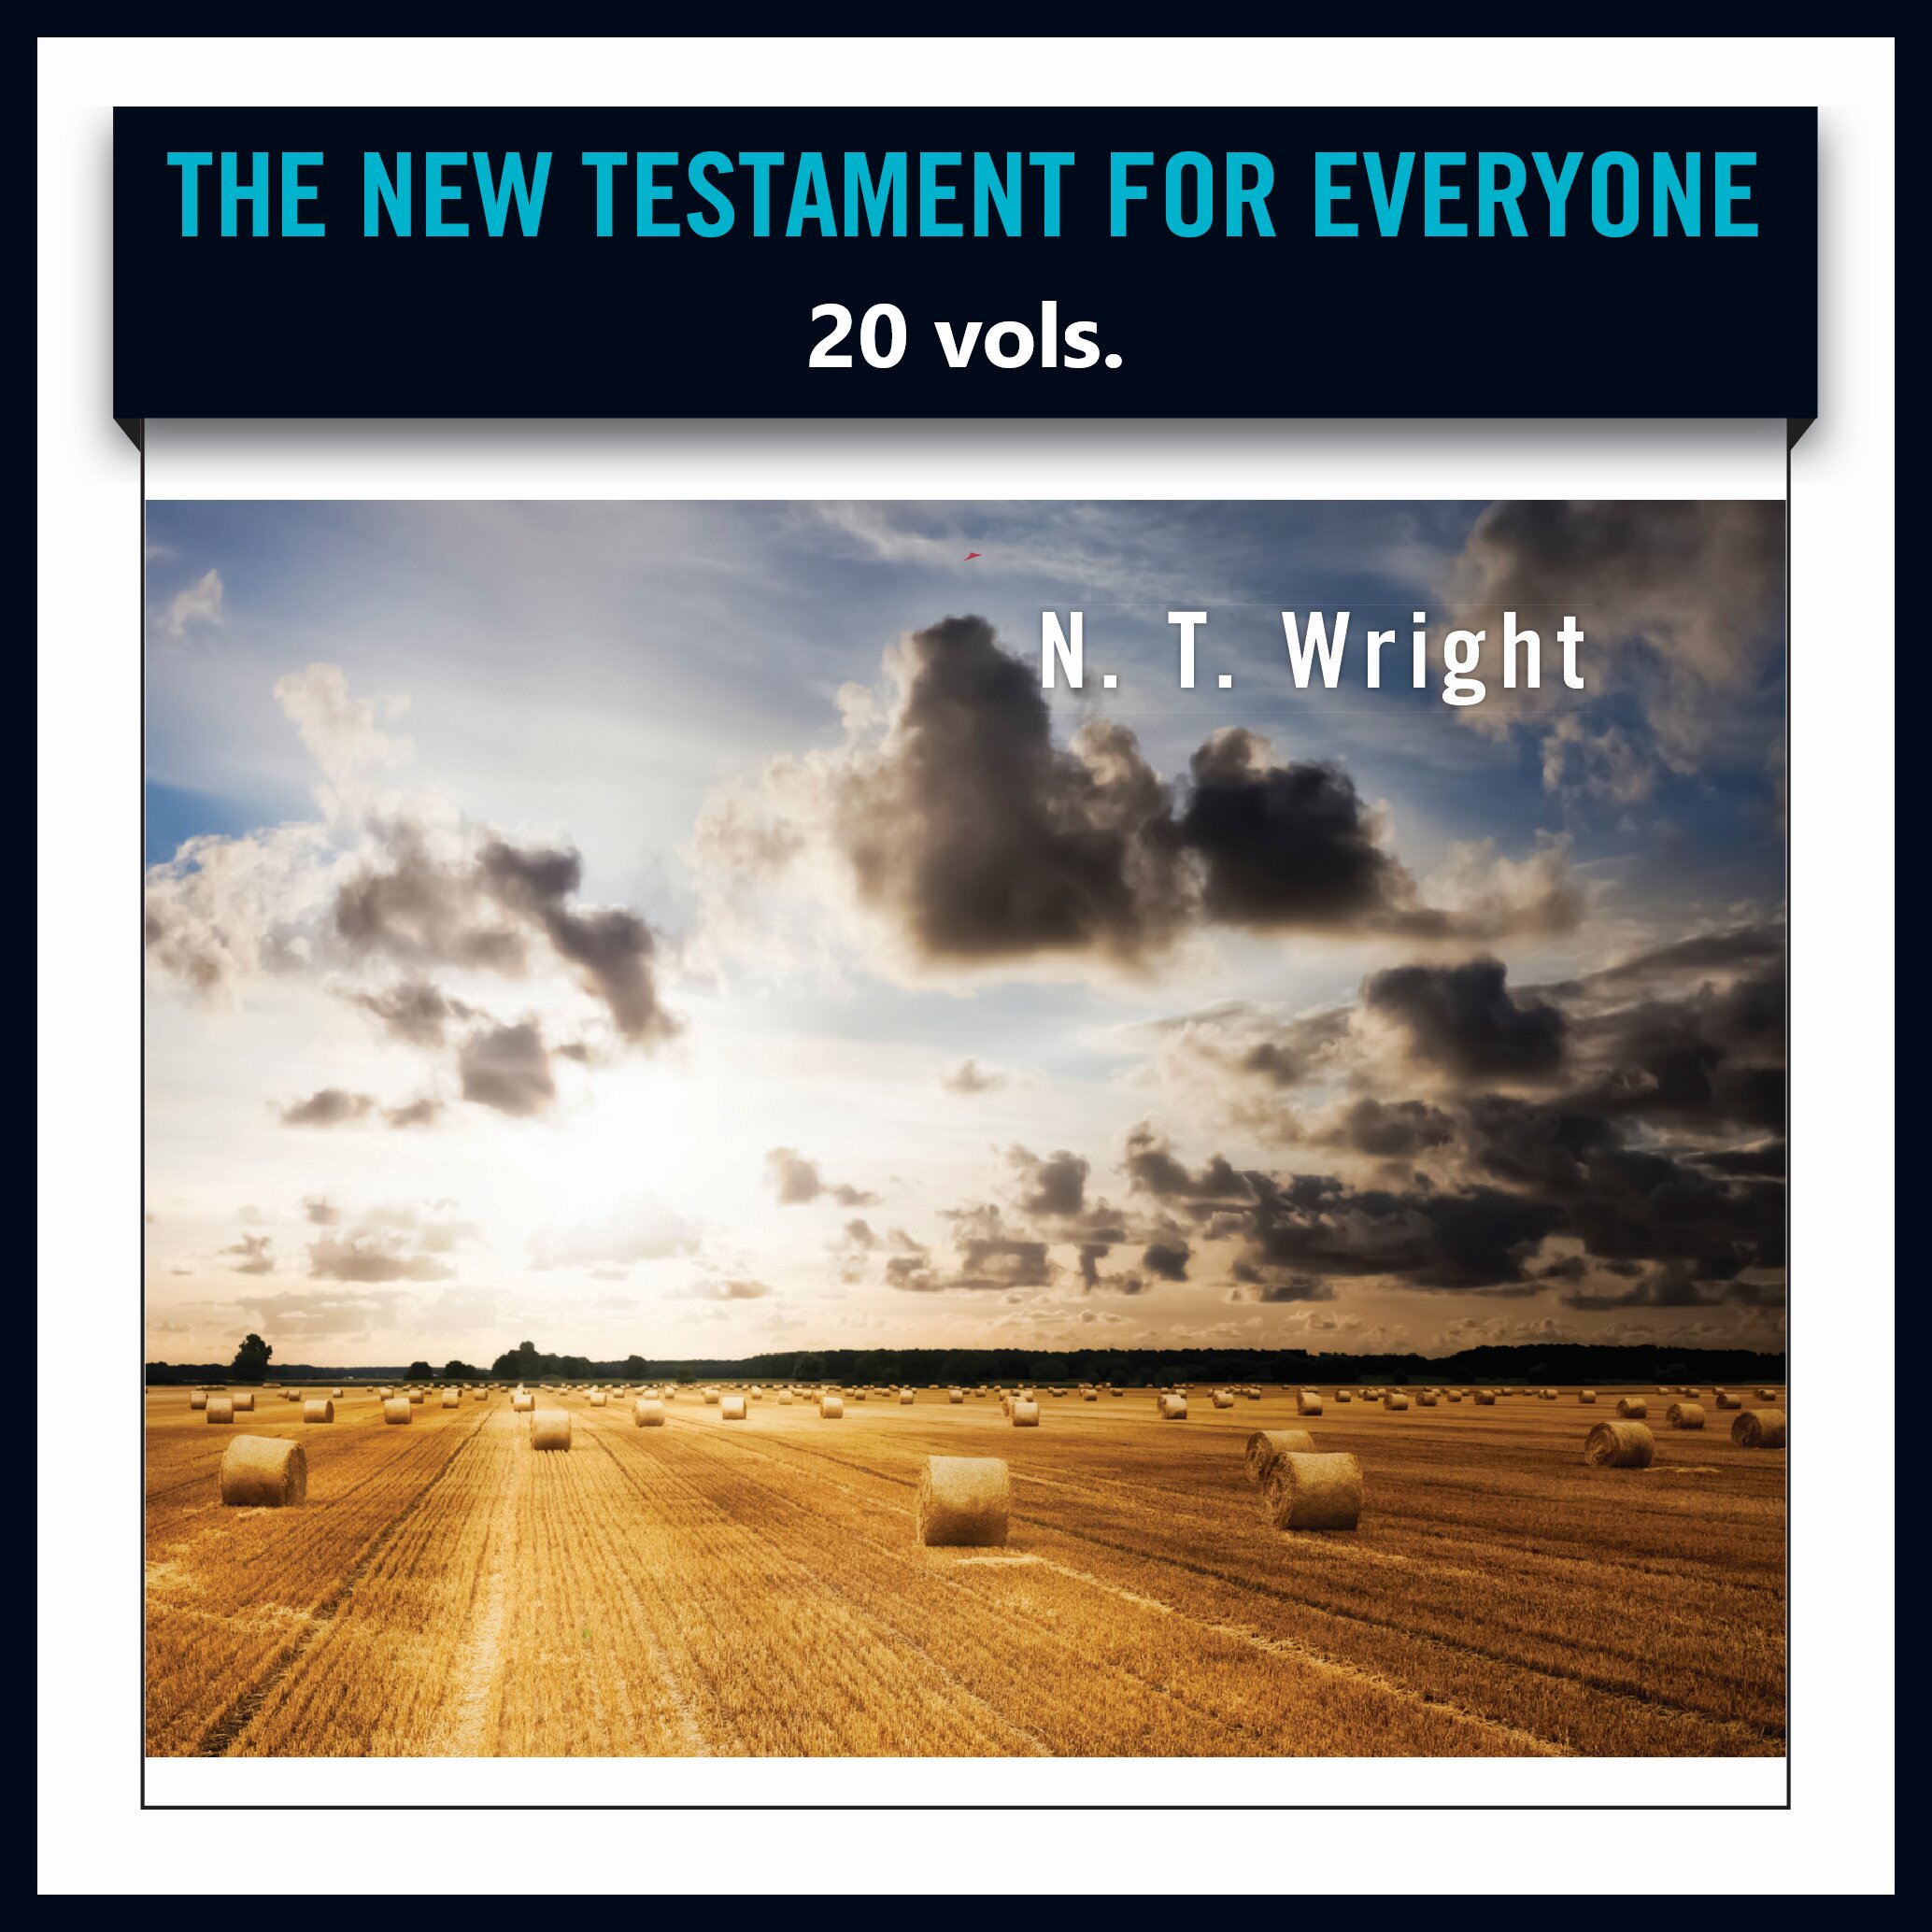 The New Testament for Everyone (20 vols.)